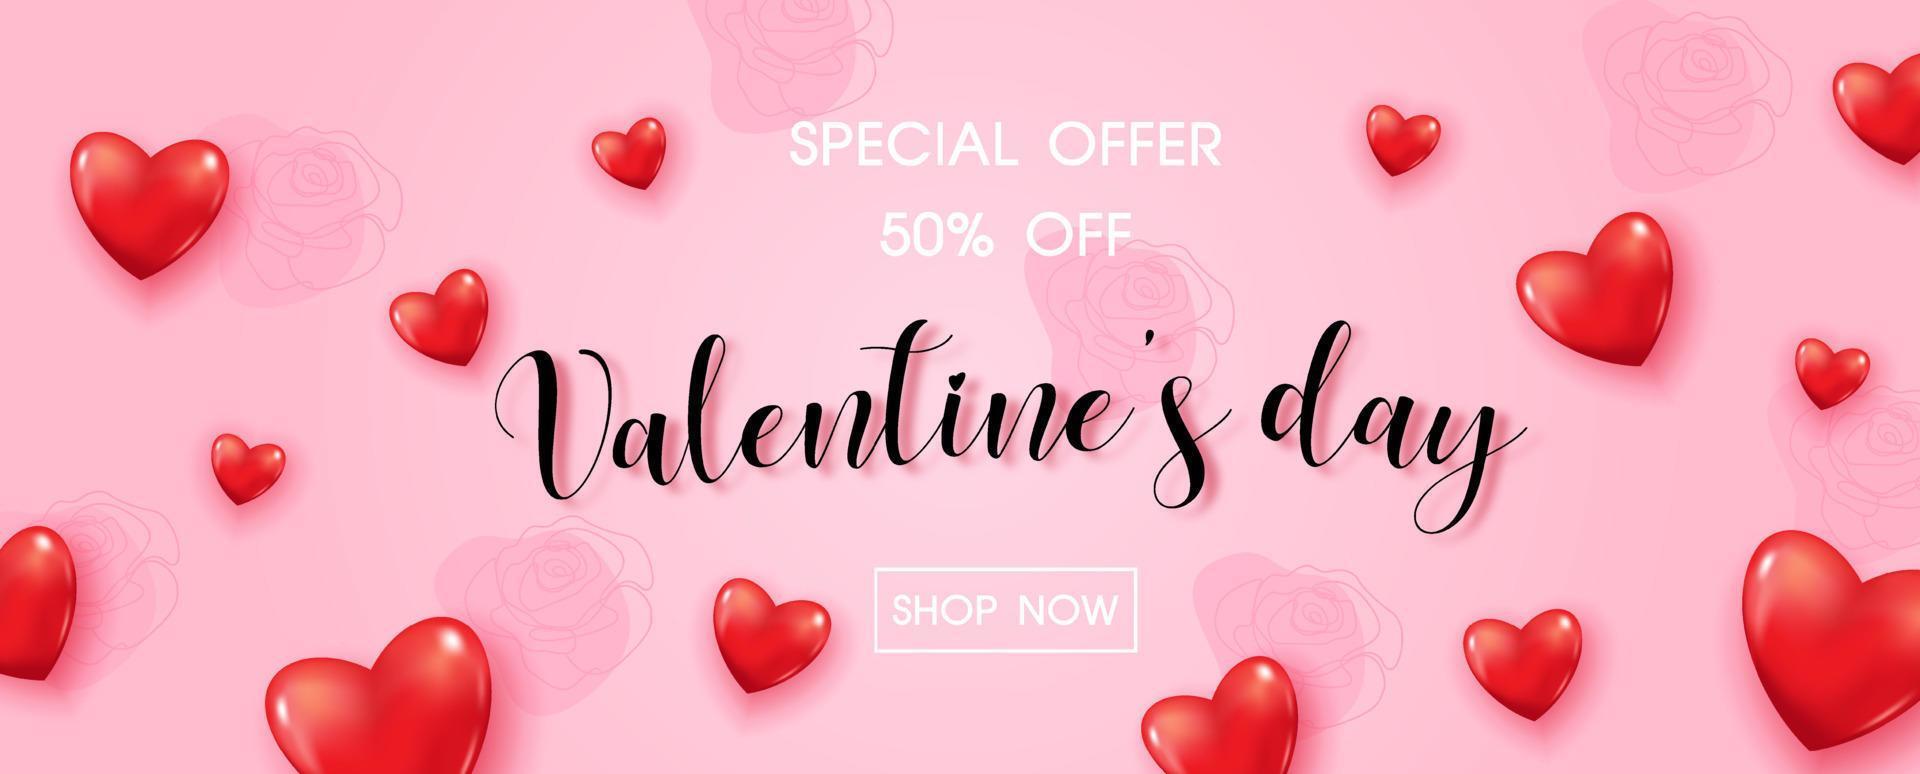 Red heart in glossy and 3d style with Valentine day's specials offer sale wording on rose flowers pattern and pink banner background. All in vector design.